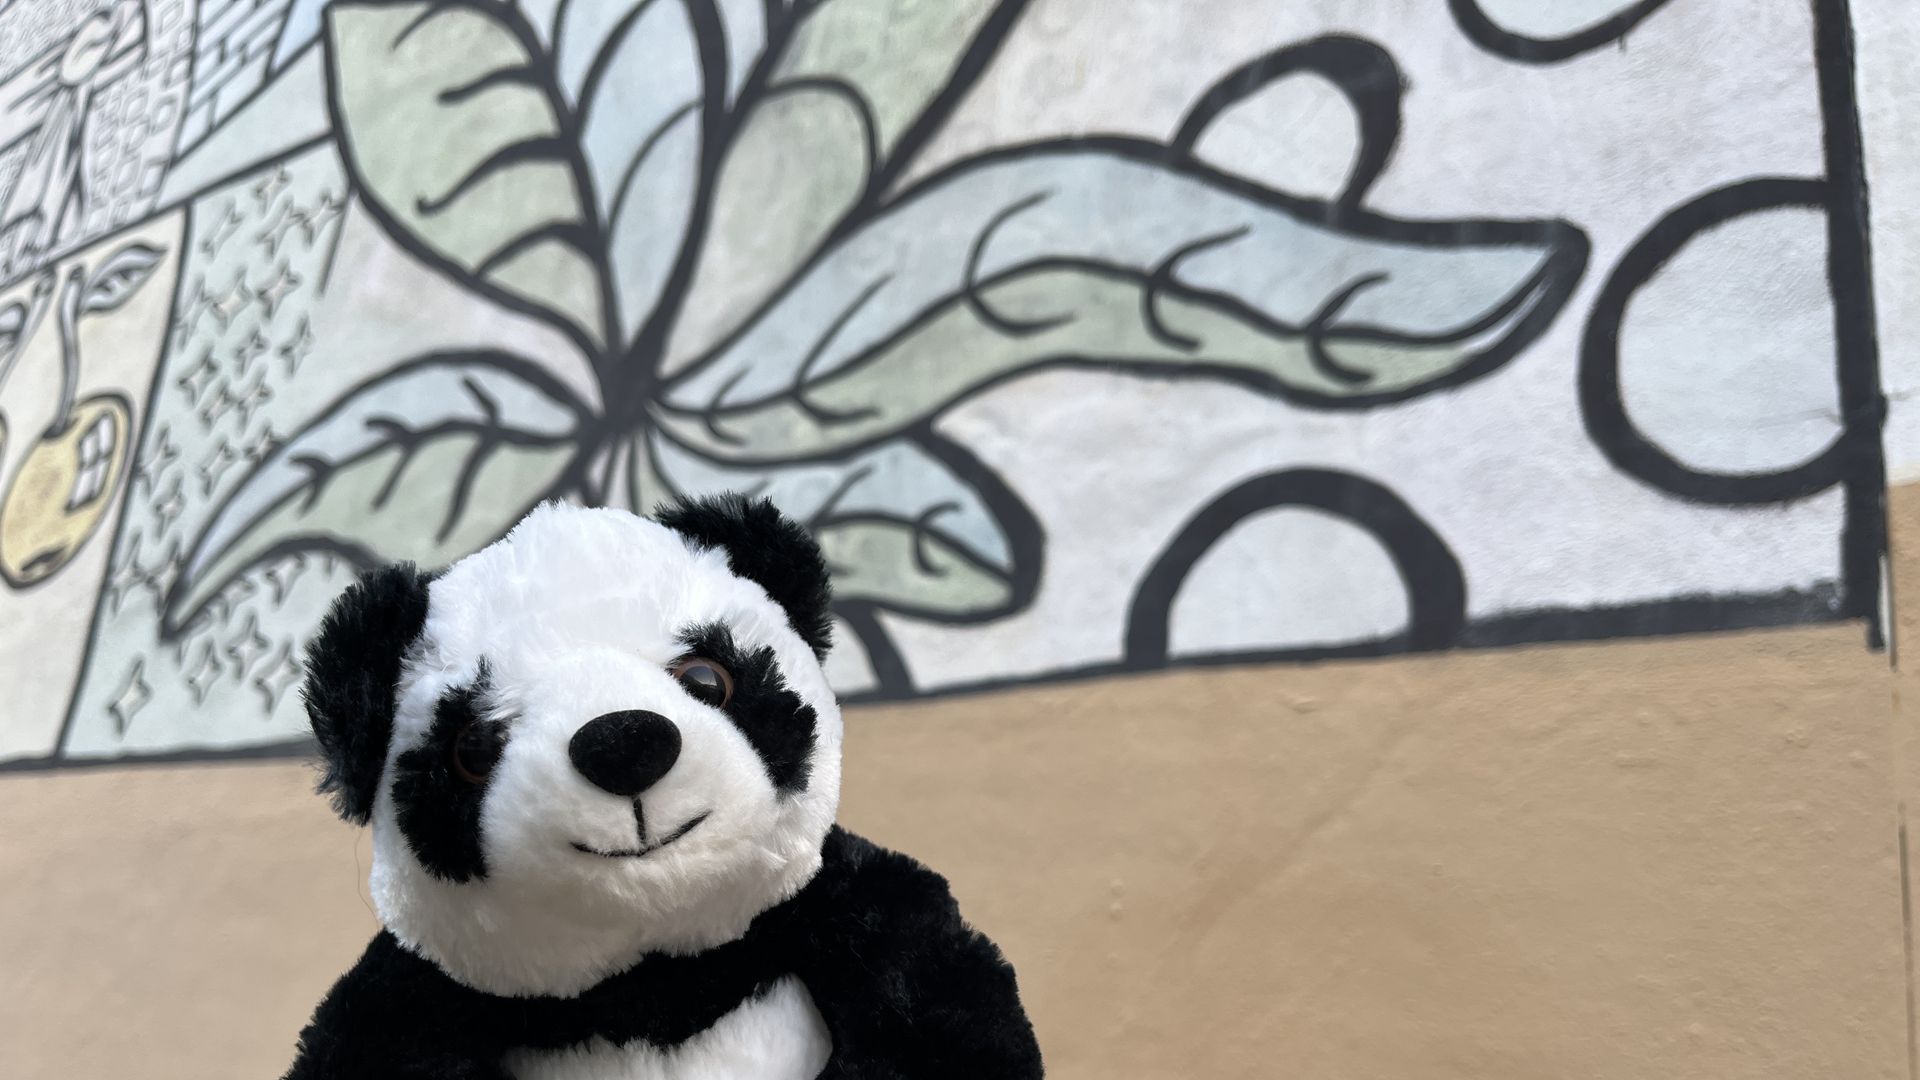 A stuffed animal panda is held in front of a faded mural with leaves and cherries.